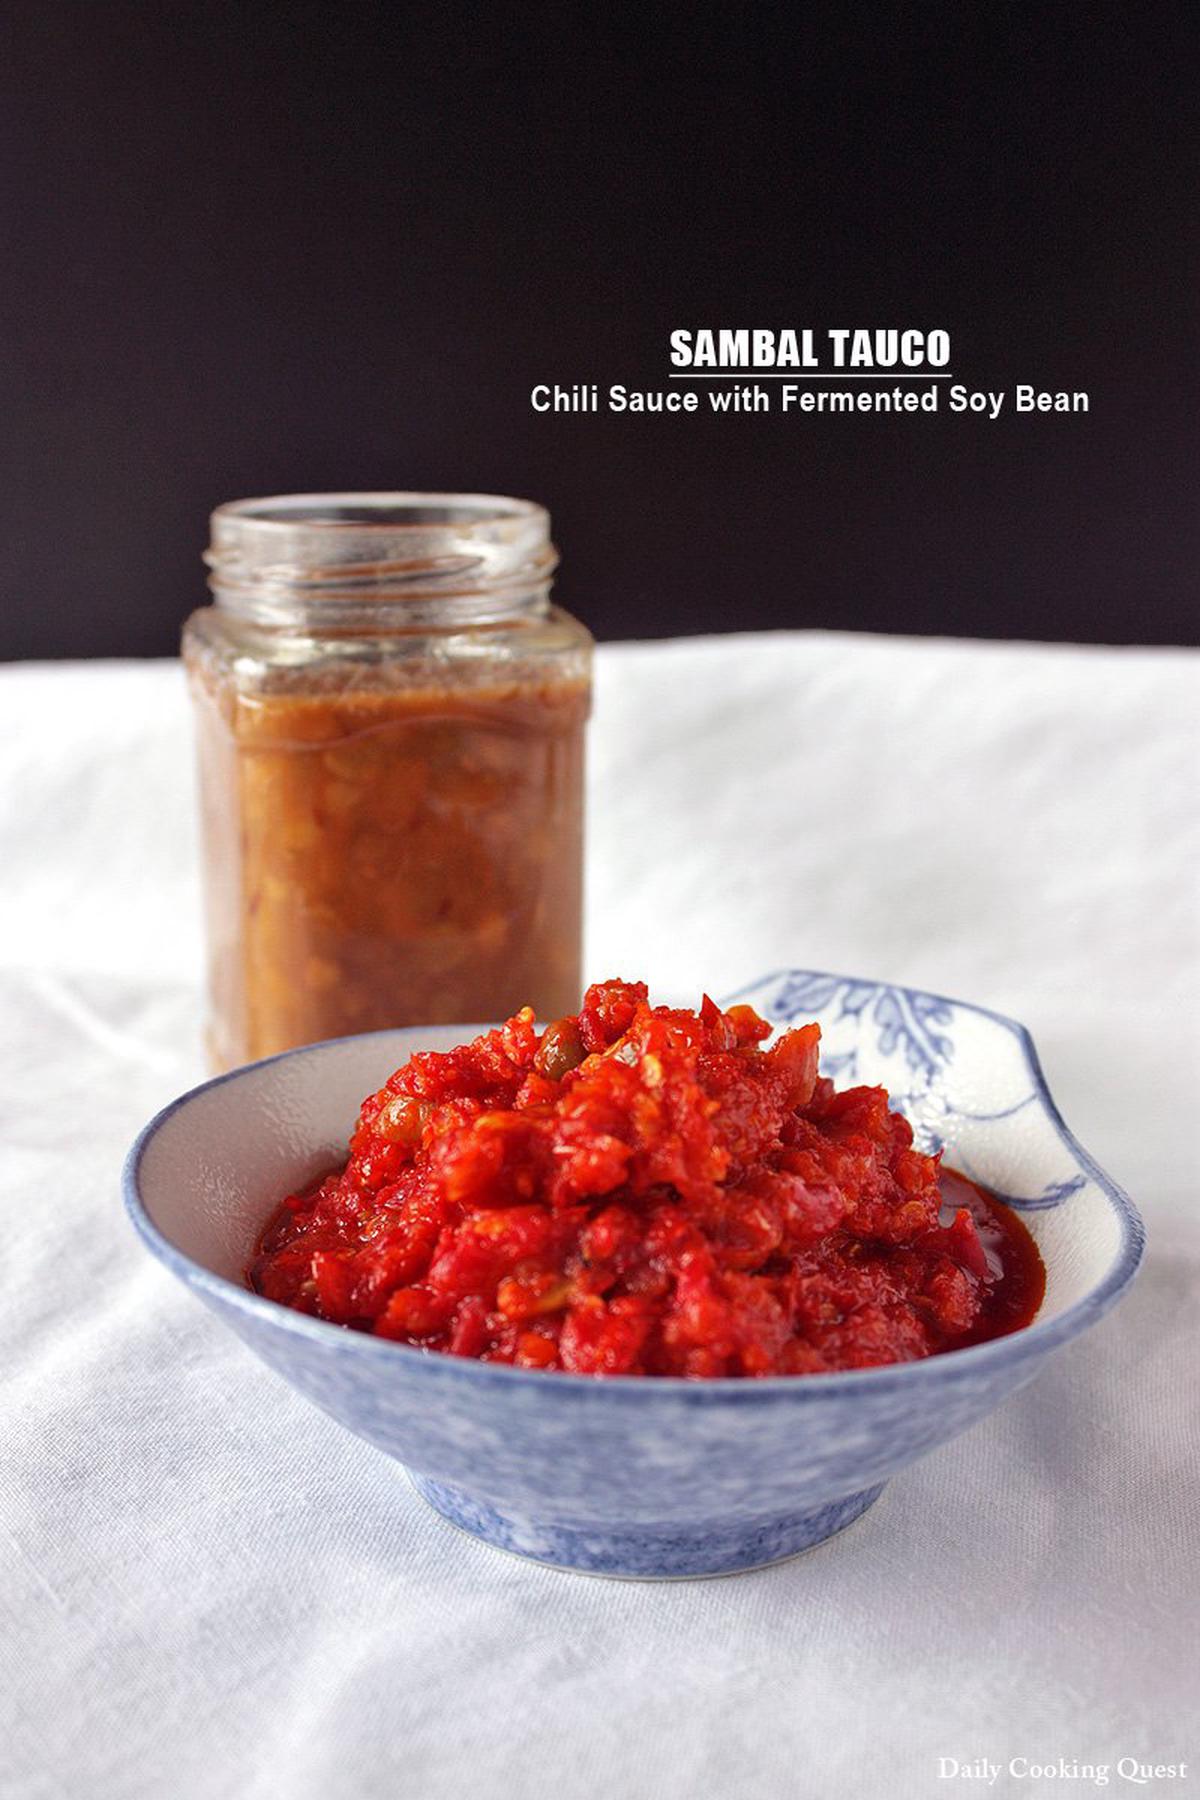 Sambal Tauco - Chili Sauce with Fermented Soy Bean